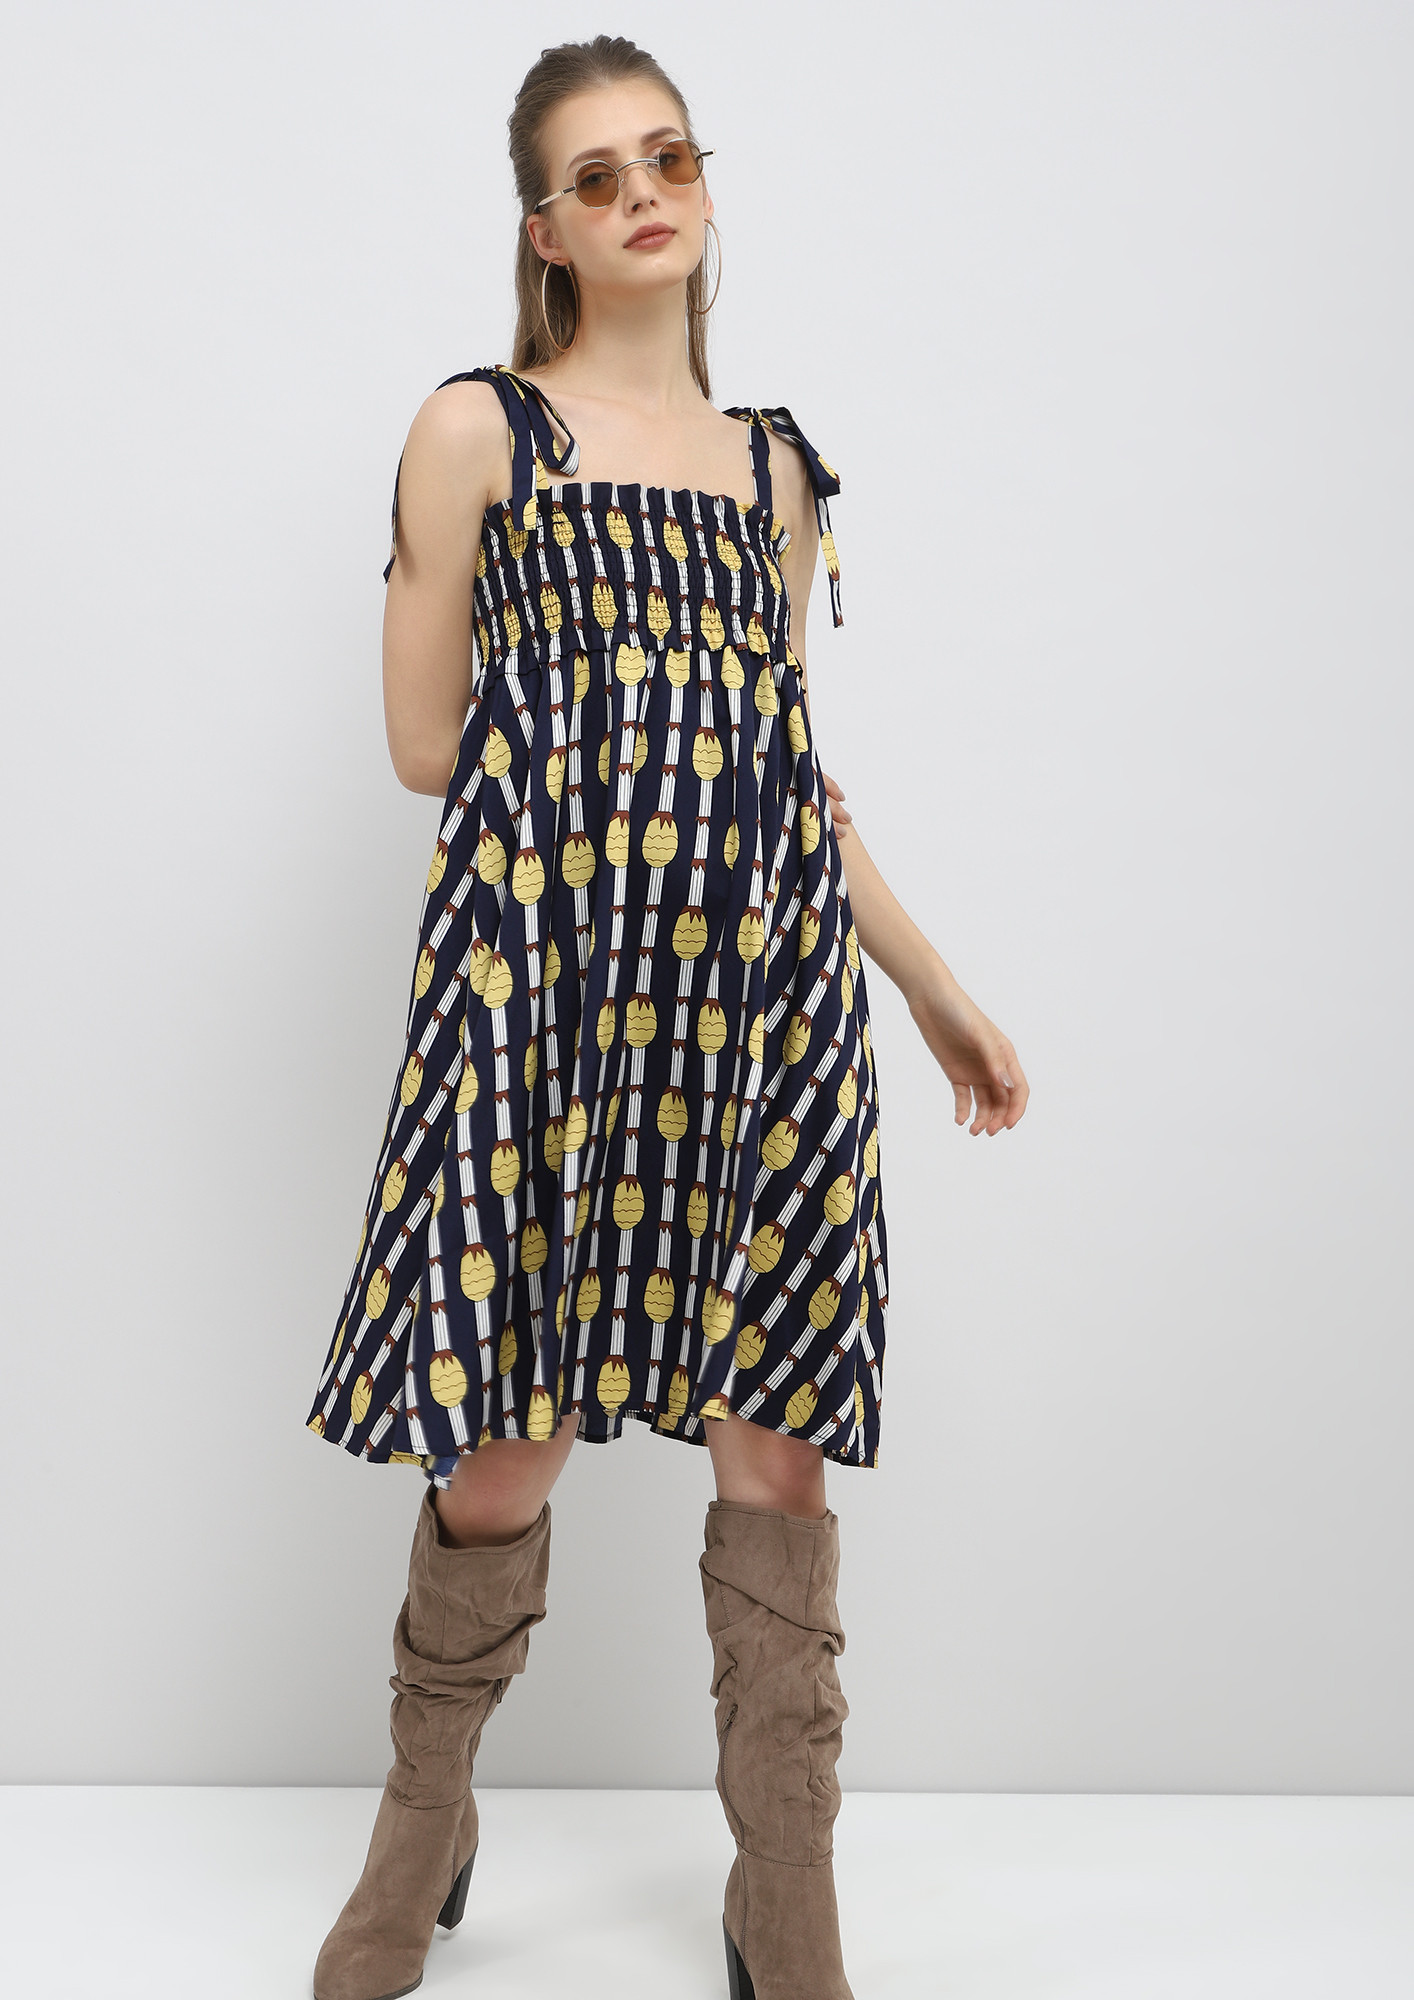 FINDING COMFORT IN CHAOS BLUE SHIFT DRESS